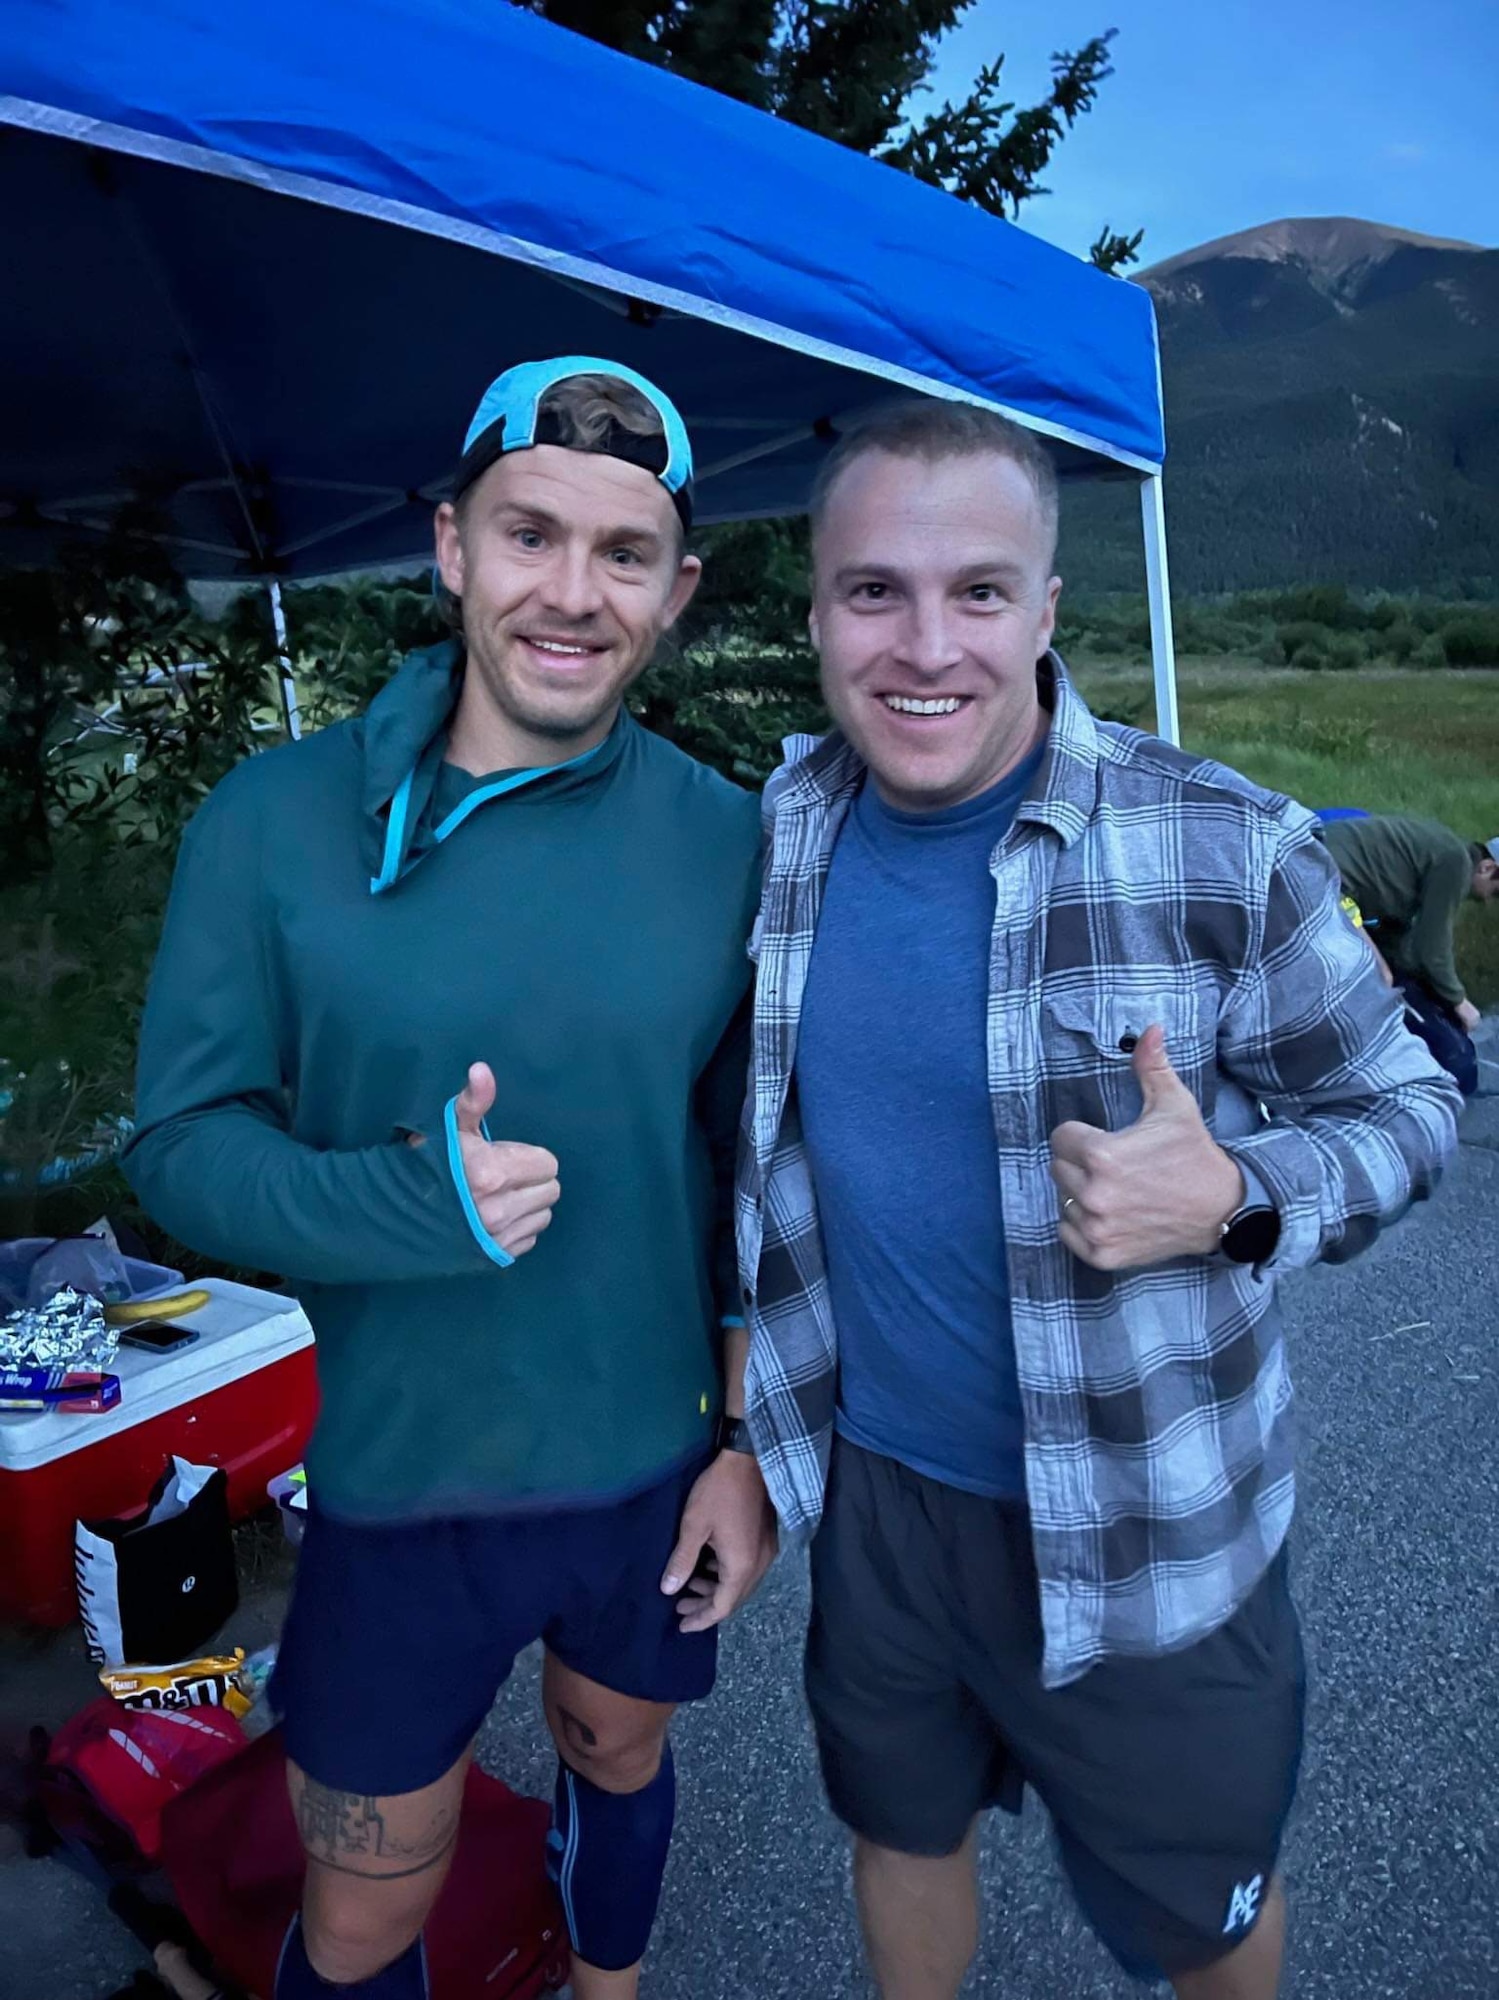 Benjamin Shearer, right, and U.S. Space Force Lt. Col. Christopher McGrath, pose for a photo during the Leadville Trail 100 Run near Leadville, Colorado, Aug. 19, 2023. Shearer and McGrath served as pacers during different portions of Patrick Buzzard’s, 4th Test and Evaluation Squadron security manager, 100-mile race. The Leadville Trail 100 Run is an ultramarathon held annually on rugged trails and dirt roads through the heart of the Rocky Mountains. The course is a 50-mile out-and-back dogleg run primarily on the Colorado Trail, starting at 10,200 feet. The centerpiece of the course is the climb up to Hope Pass at 12,620 feet, encountered on both the outbound trek and on the return. Buzzard finished the 100-mile course in 29 hours, 48 minutes, and 57 seconds, just beating the 30-hour time limit. (Courtesy photo)